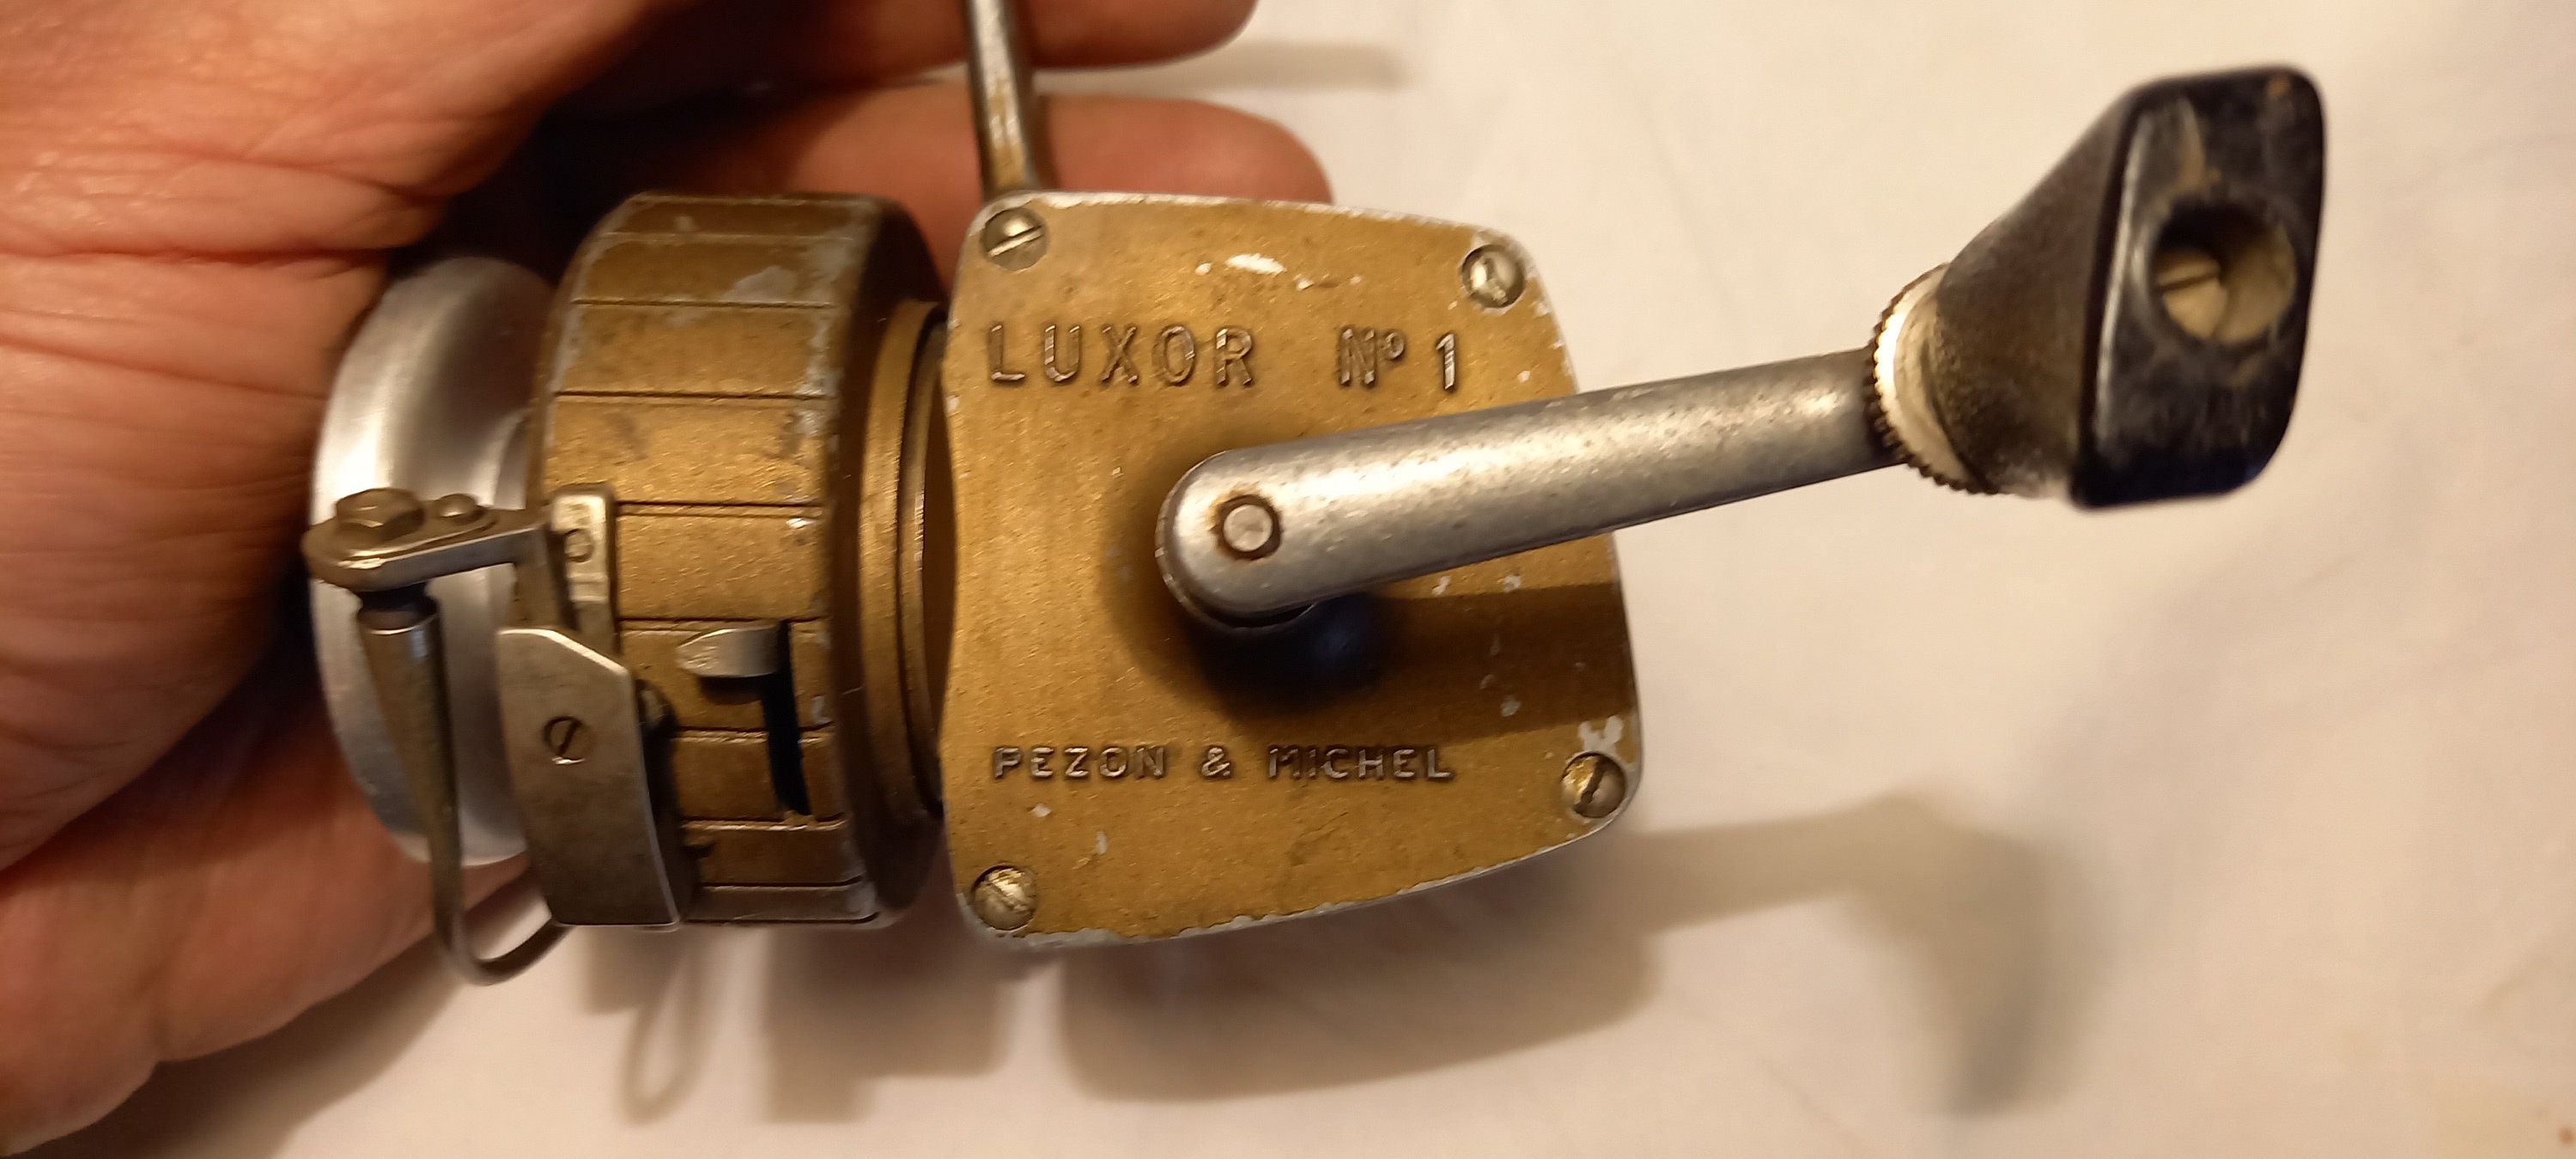 Buy Vintage ,,LUXOR No.1 PEZON & MICHEL'' Spinning Spin Fishing